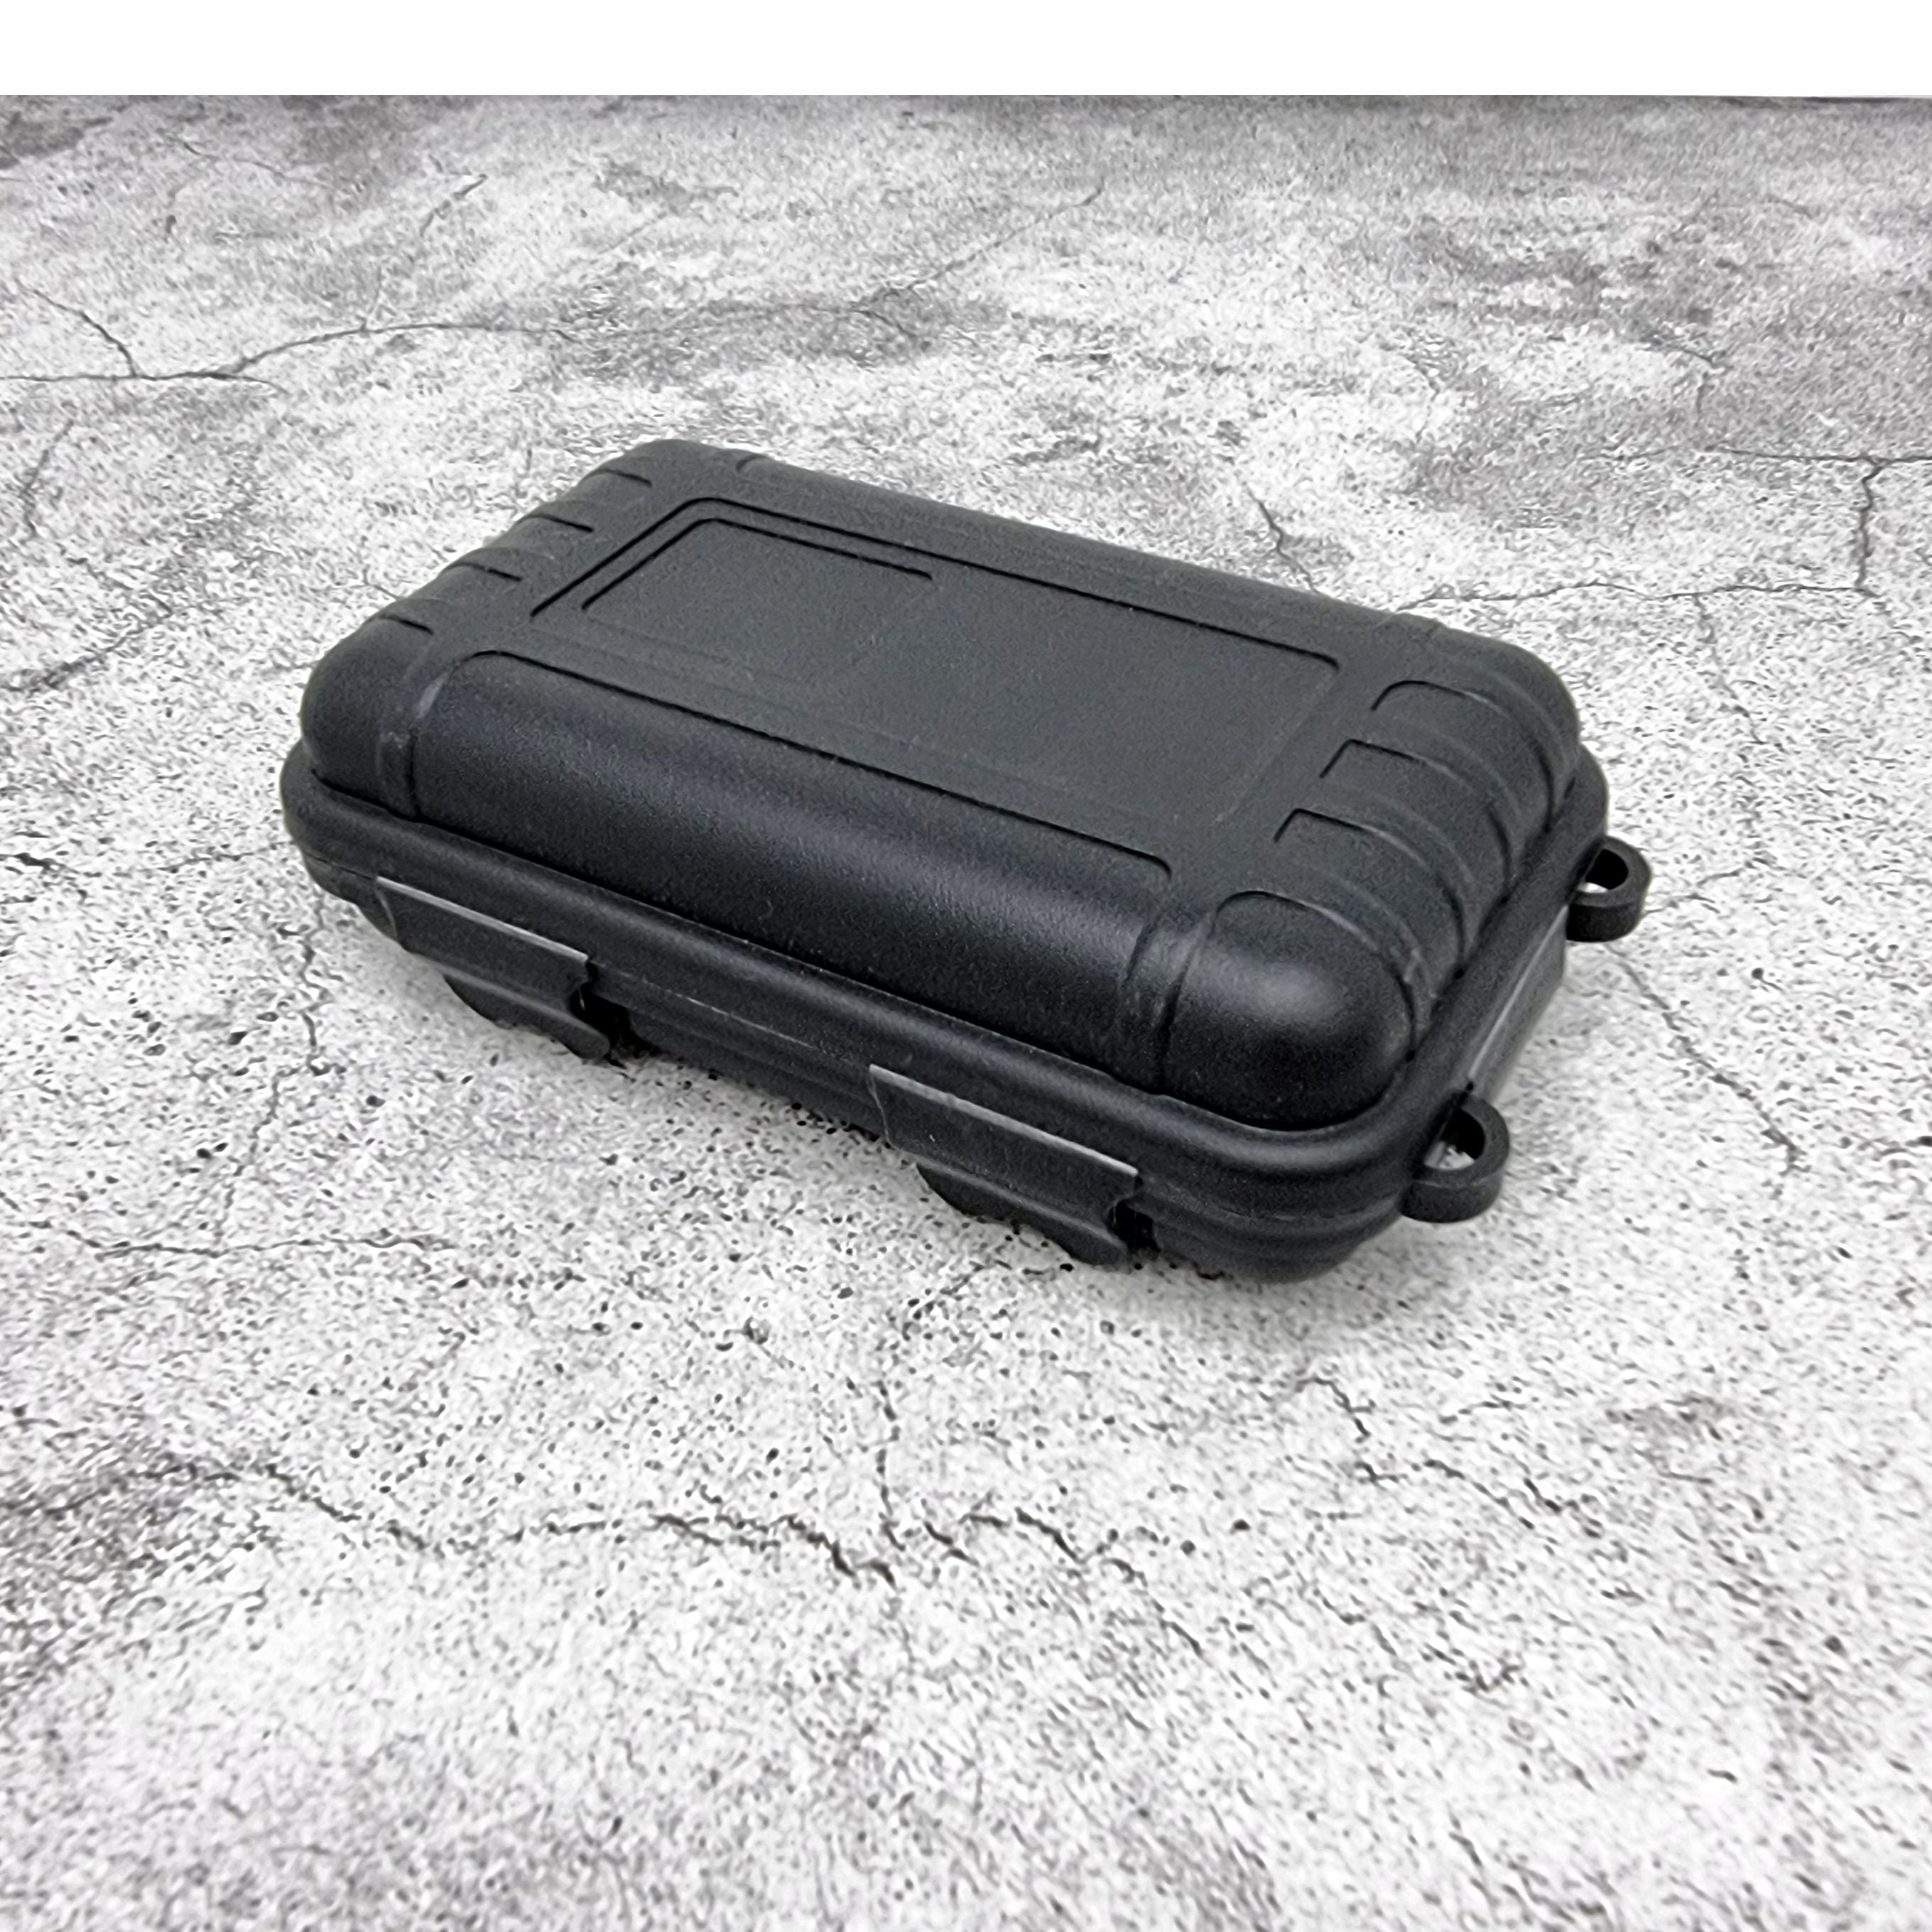 Empty Shock Proof Case (small)